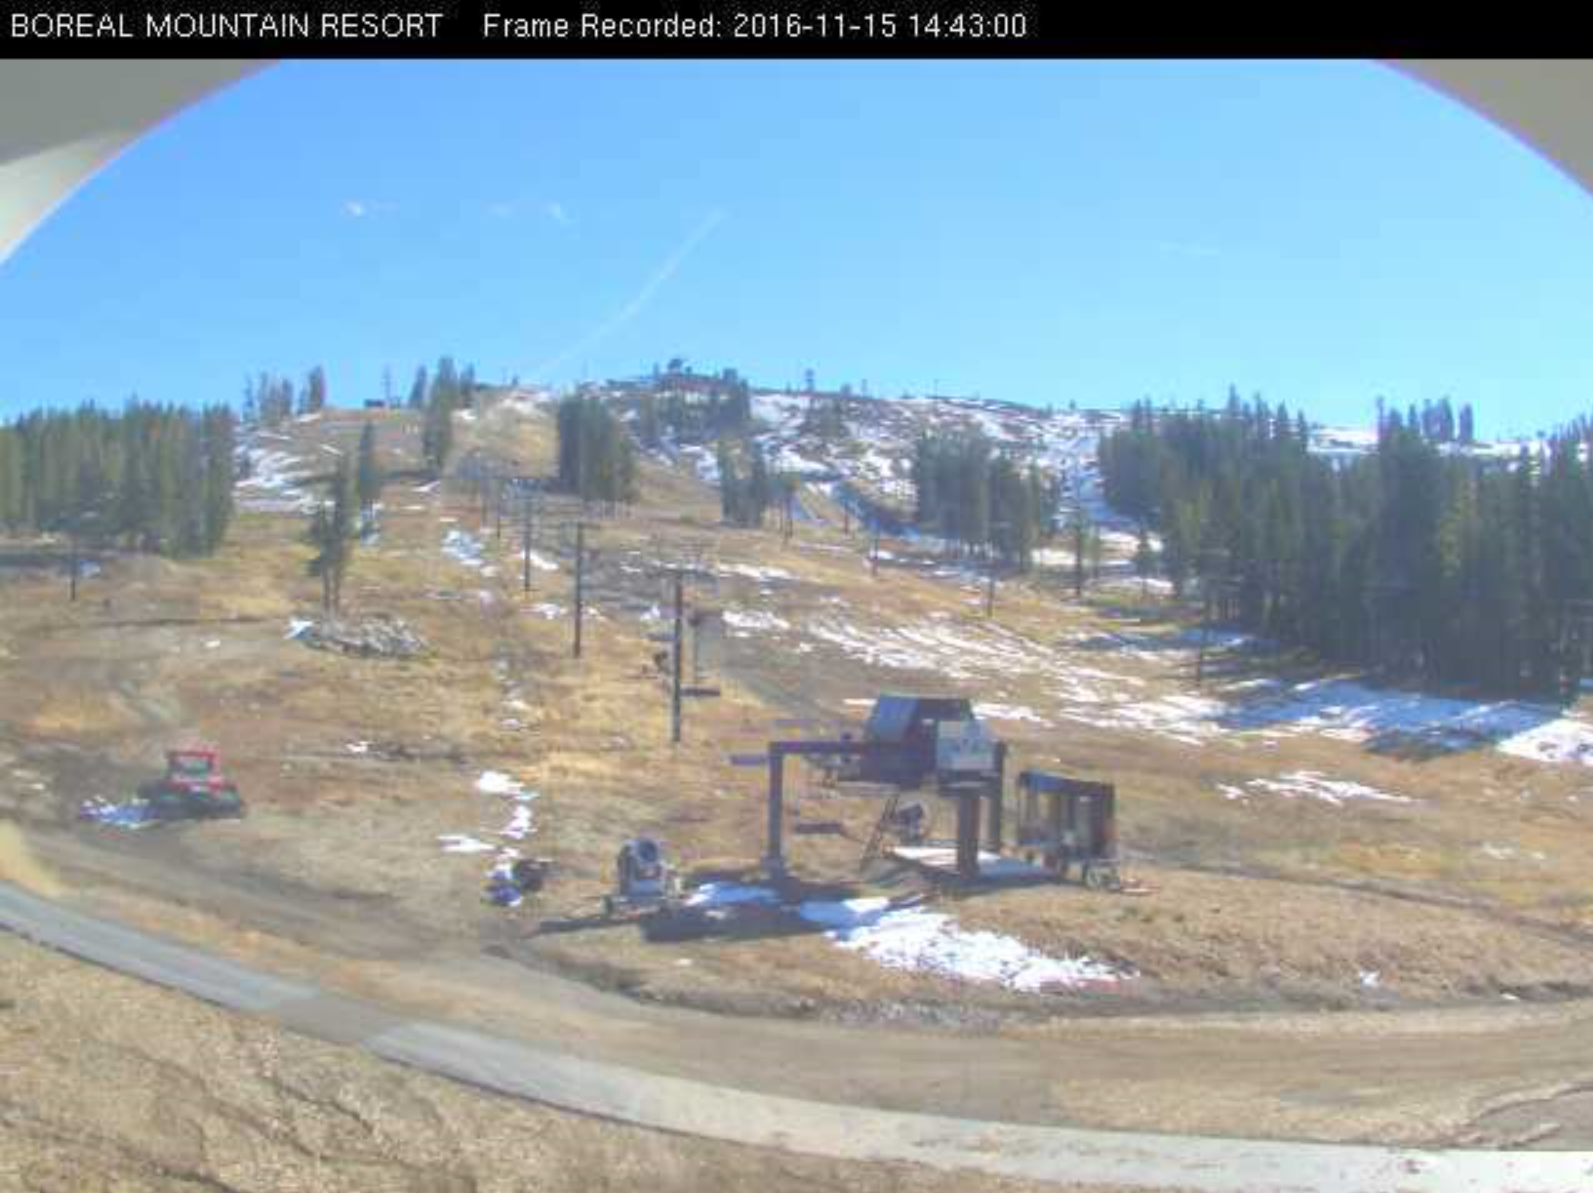 Current conditions at Boreal Mountain Resort! PC: Boreal Mountain Resort webcam